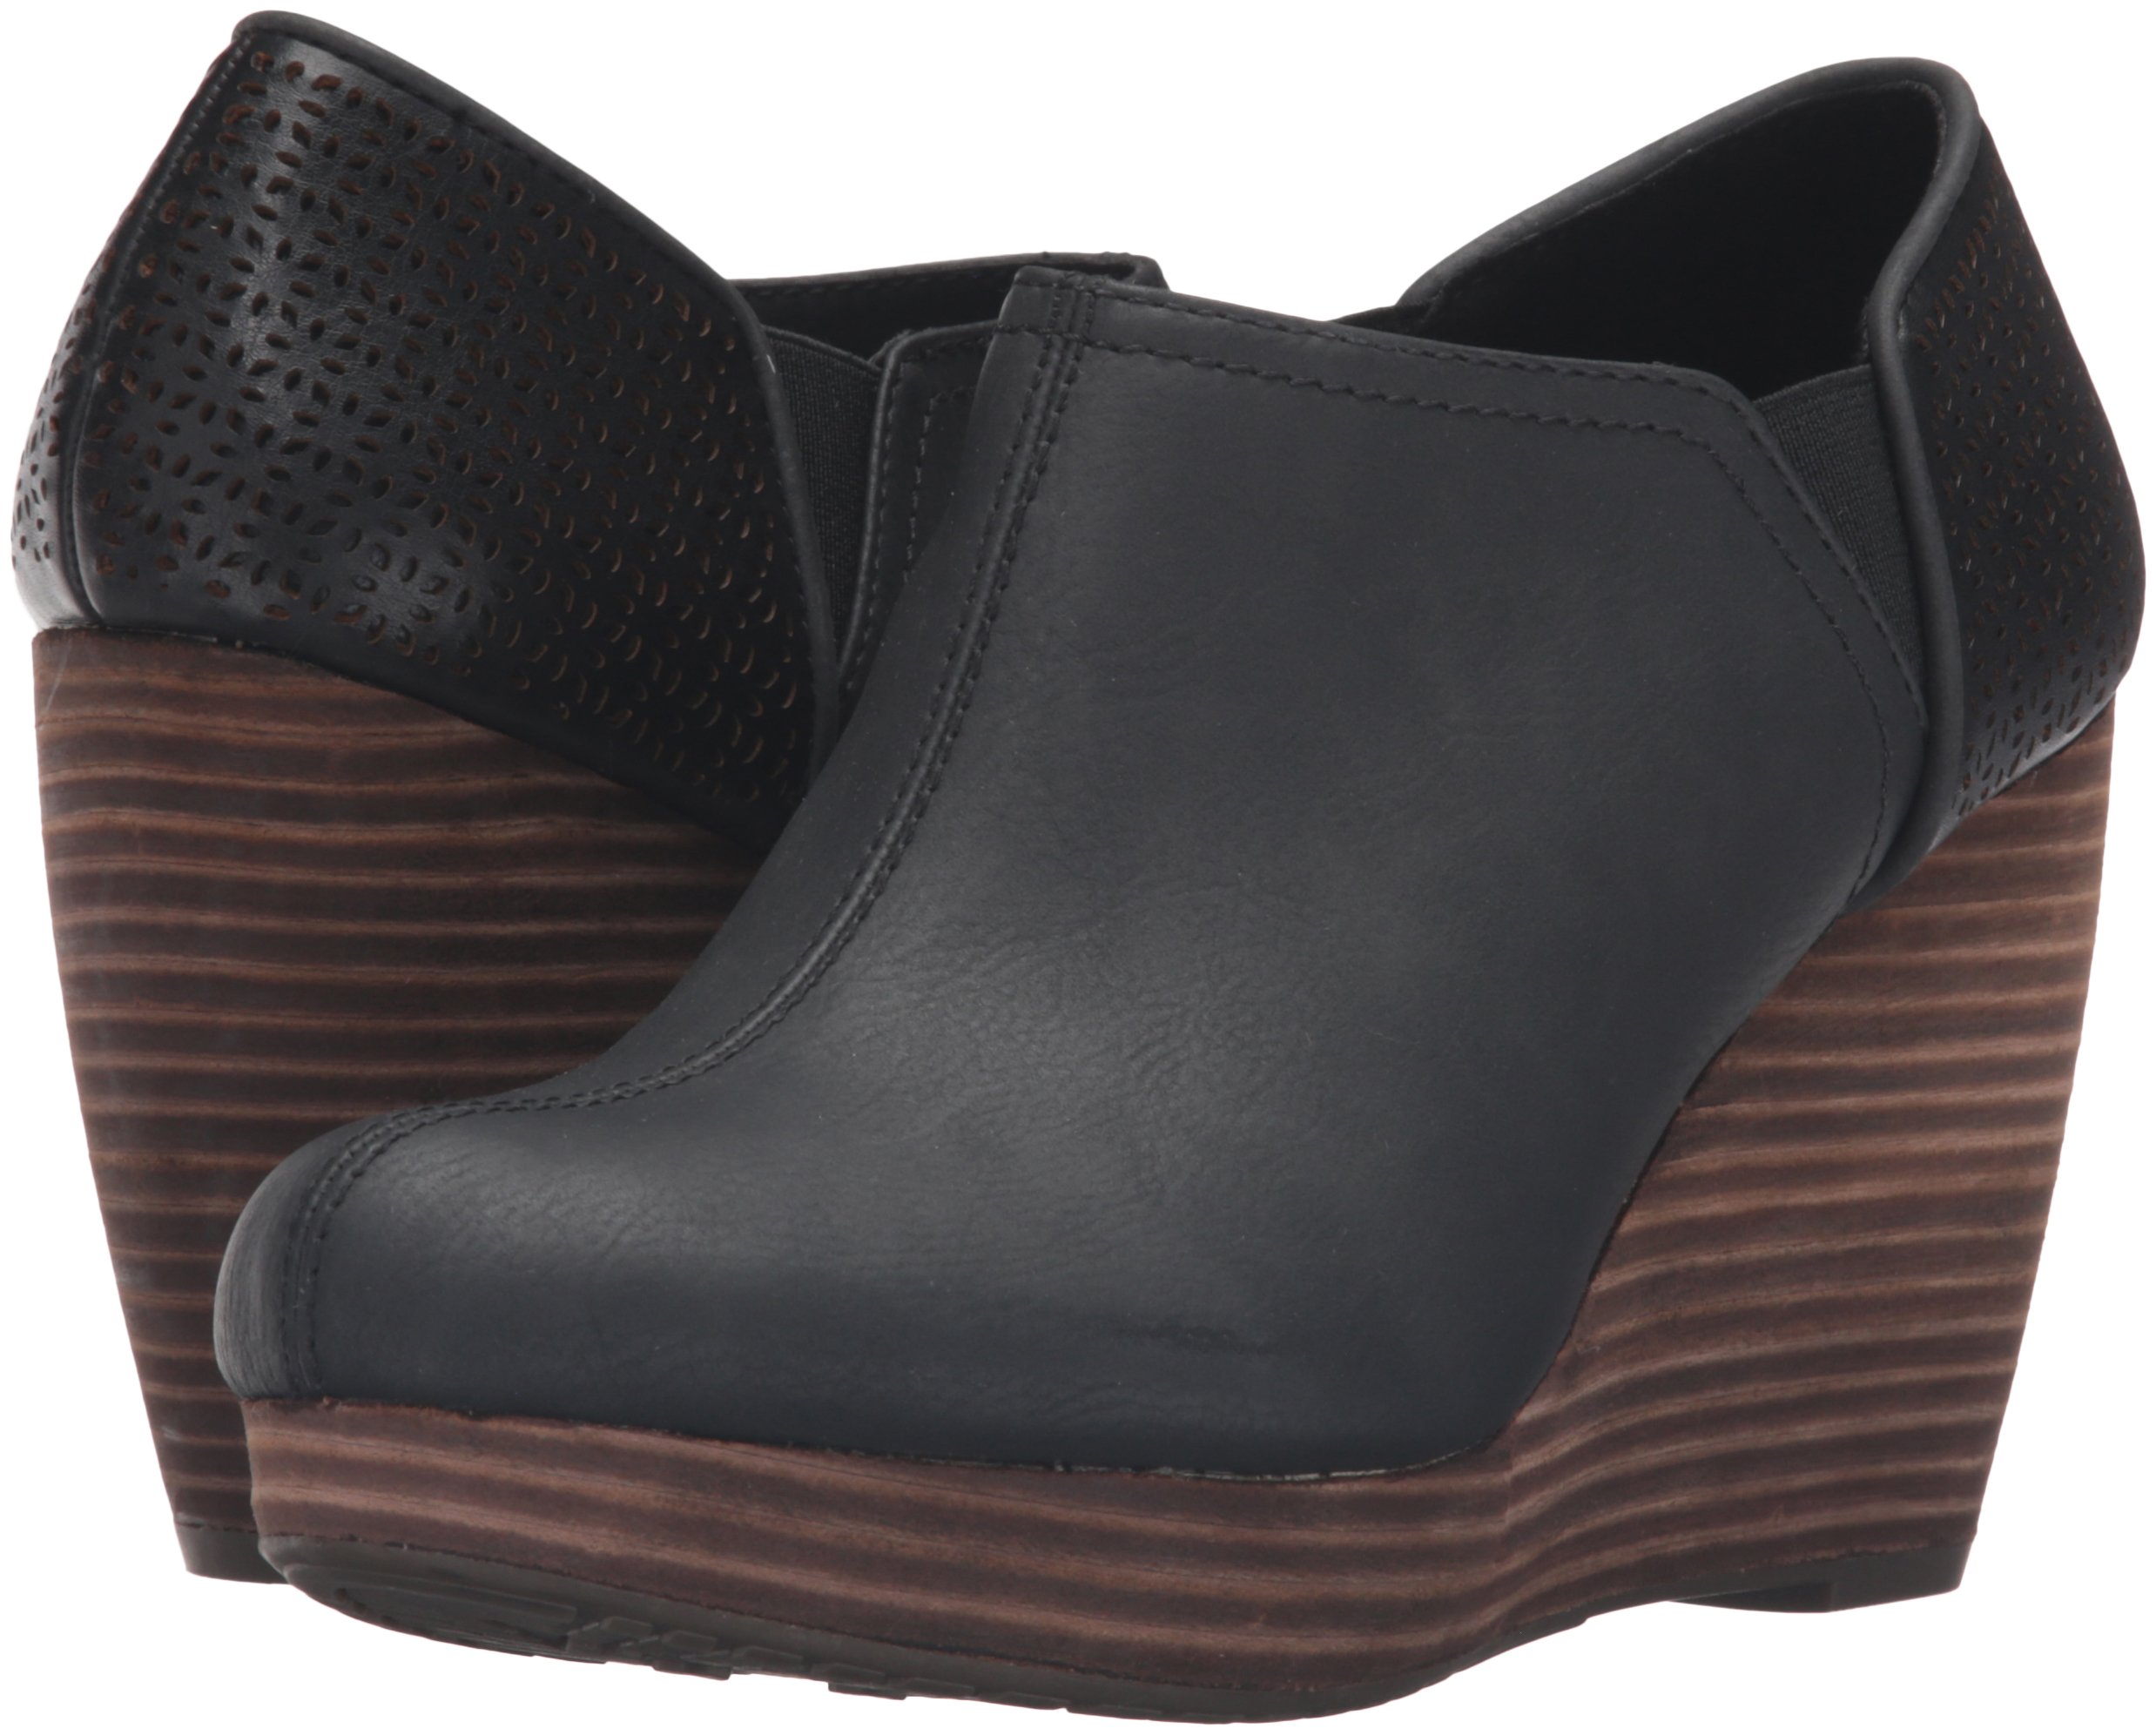 Dr. Scholl's Shoes Women's Harlow Ankle Boot